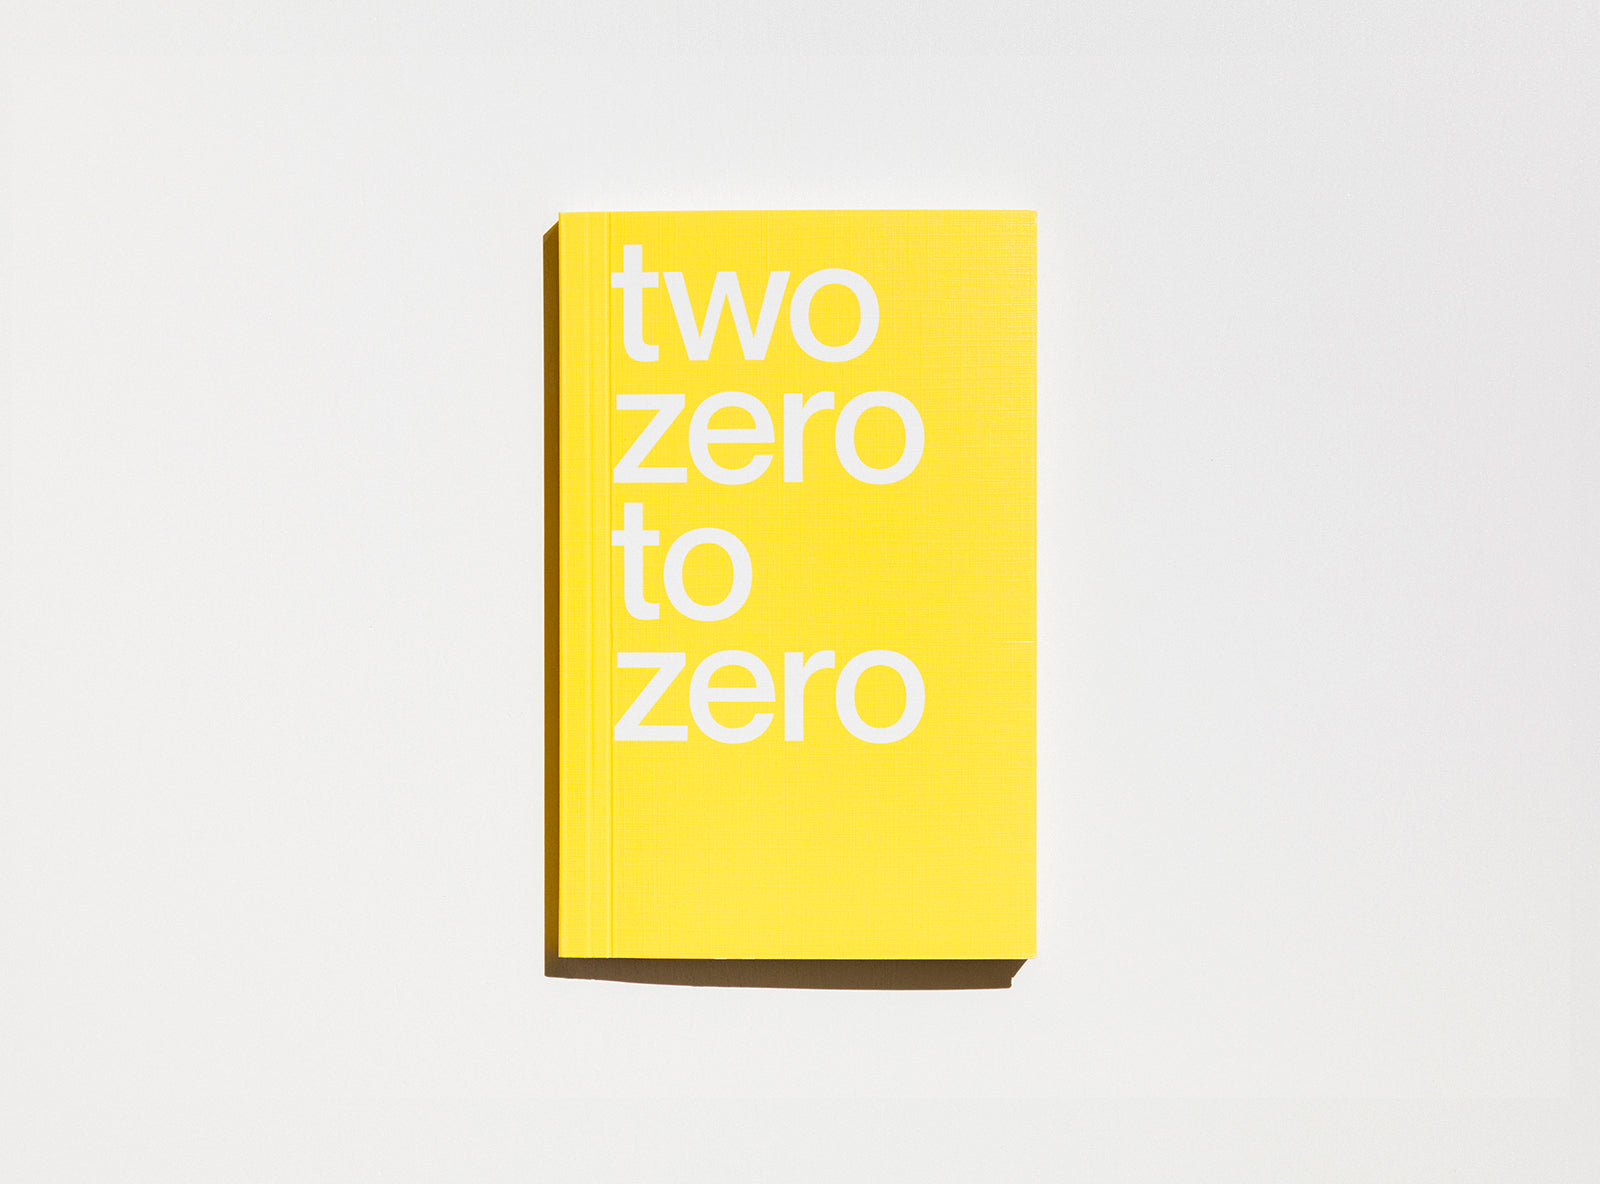 Cover of our 2020 planner which motto was two zero to zero, in yellow.